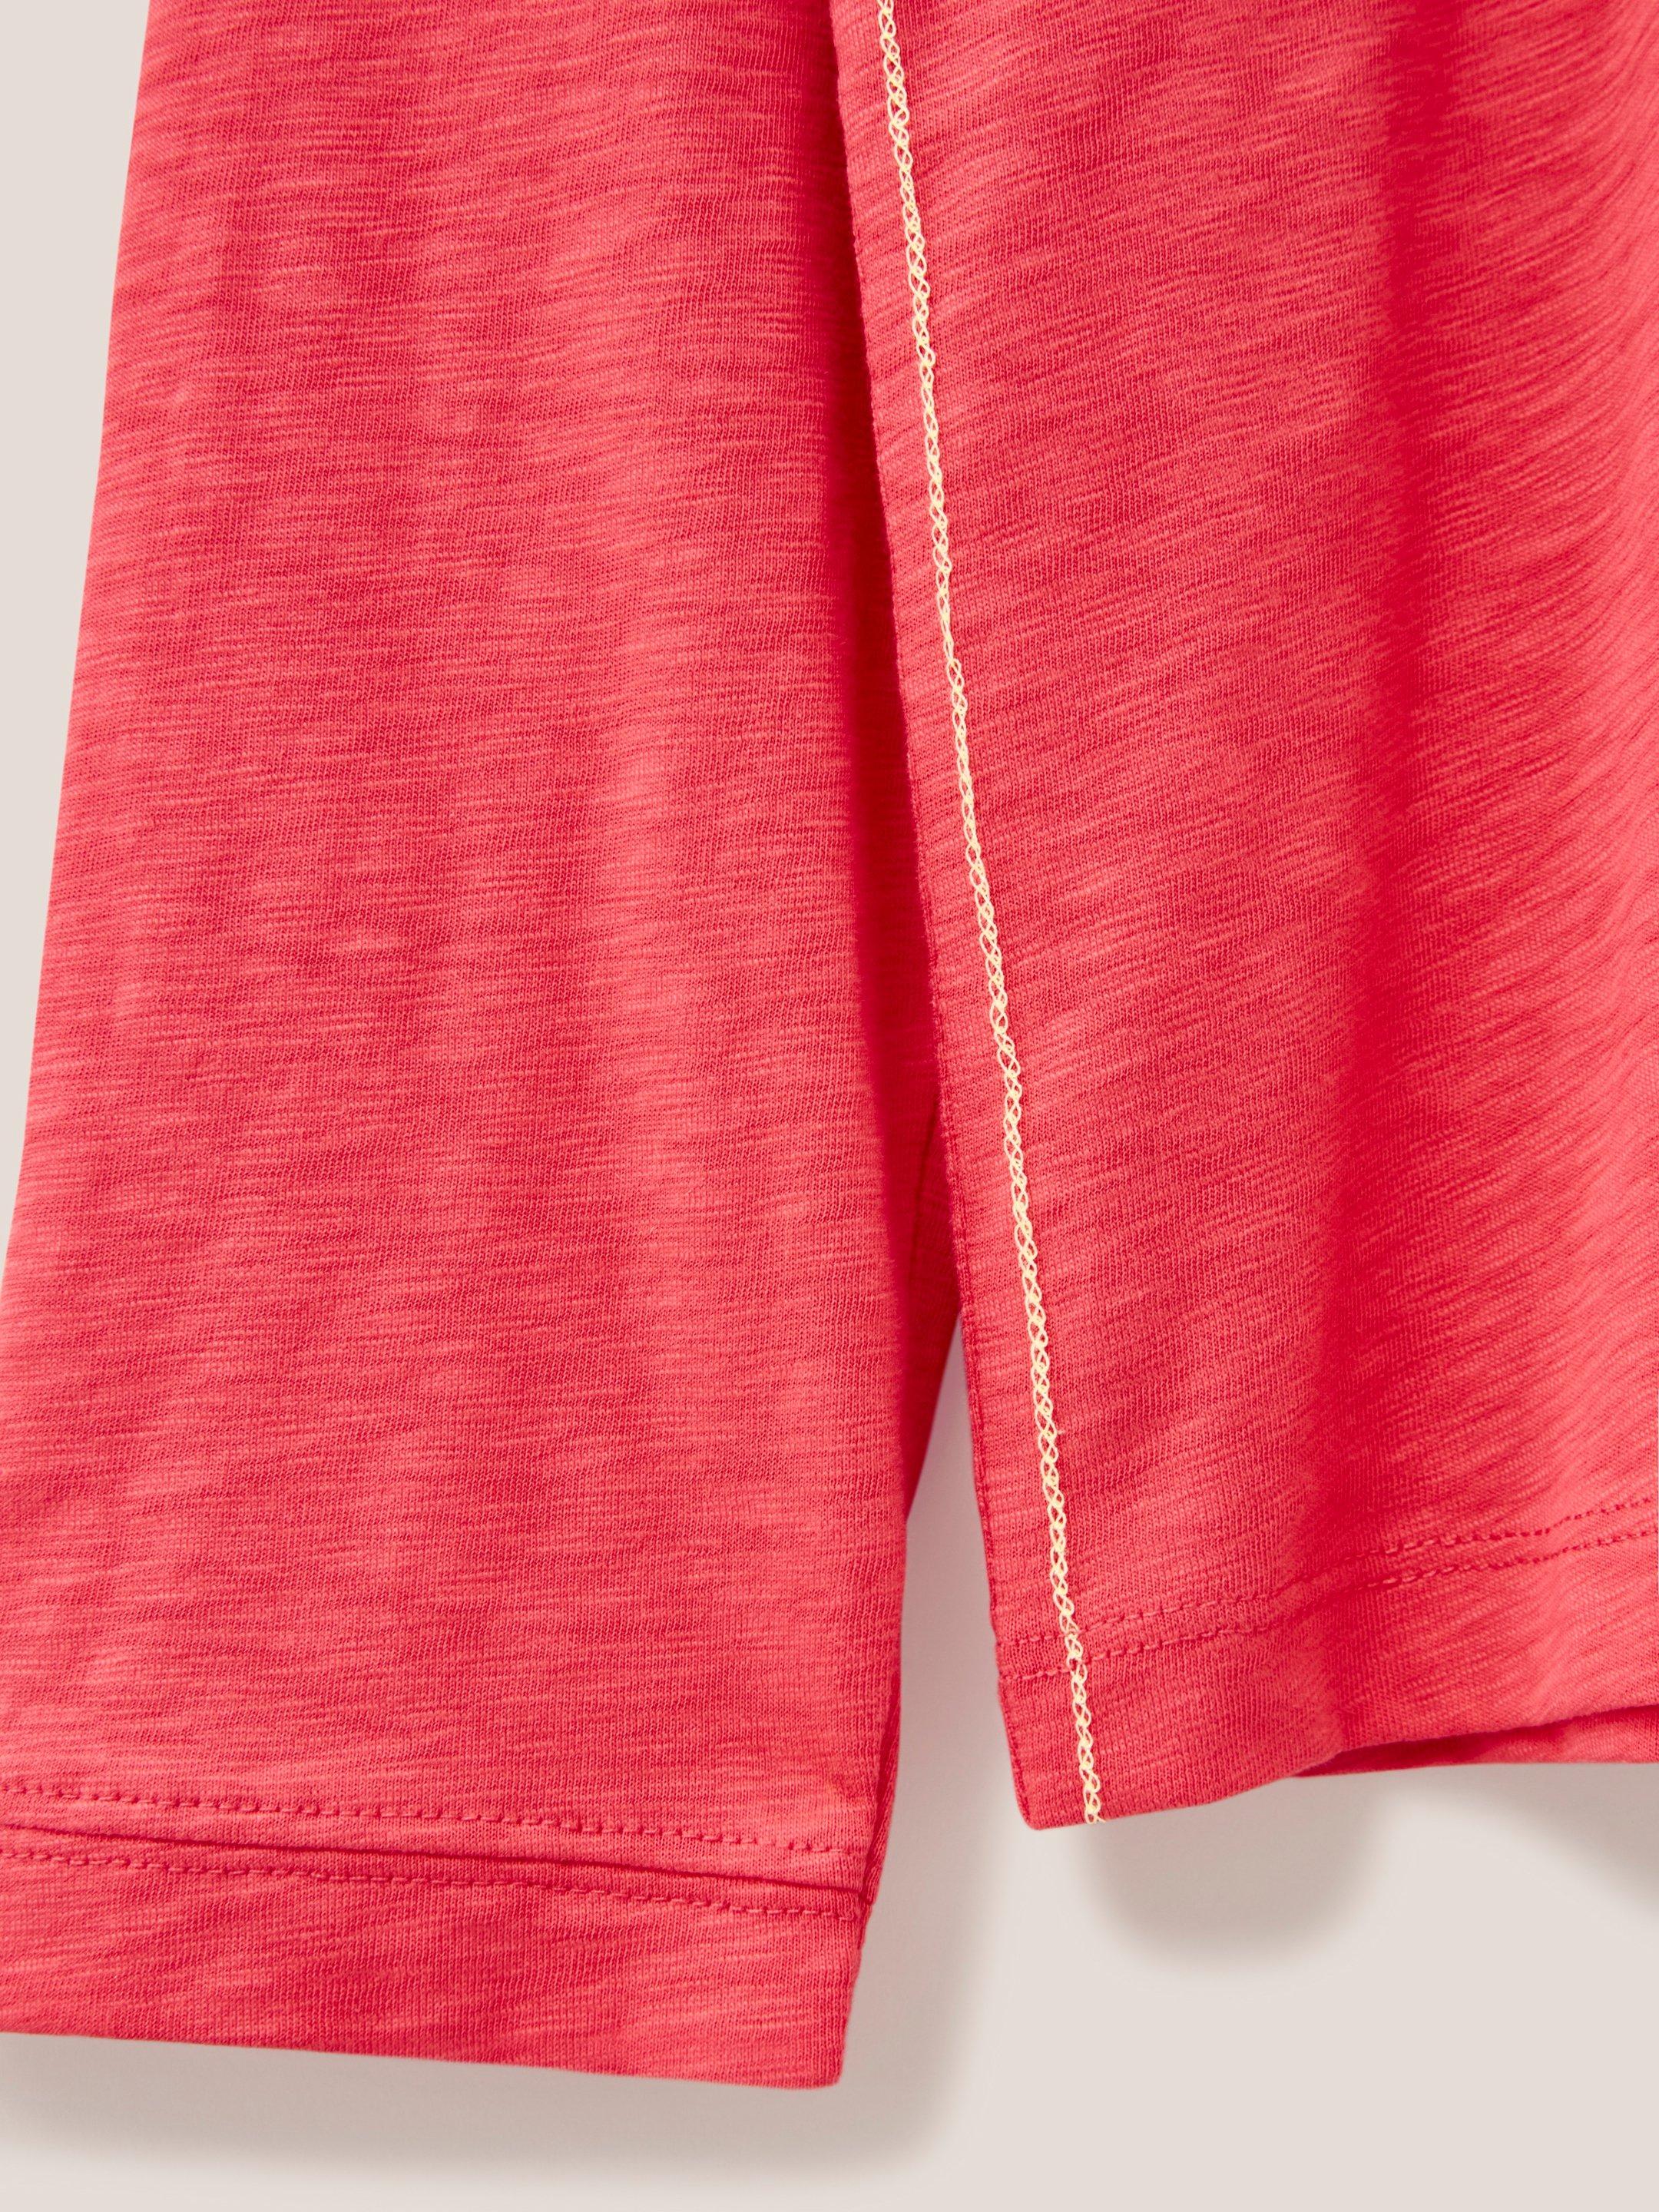 Nelly Long Sleeve T-Shirt in BRT PINK - FLAT DETAIL